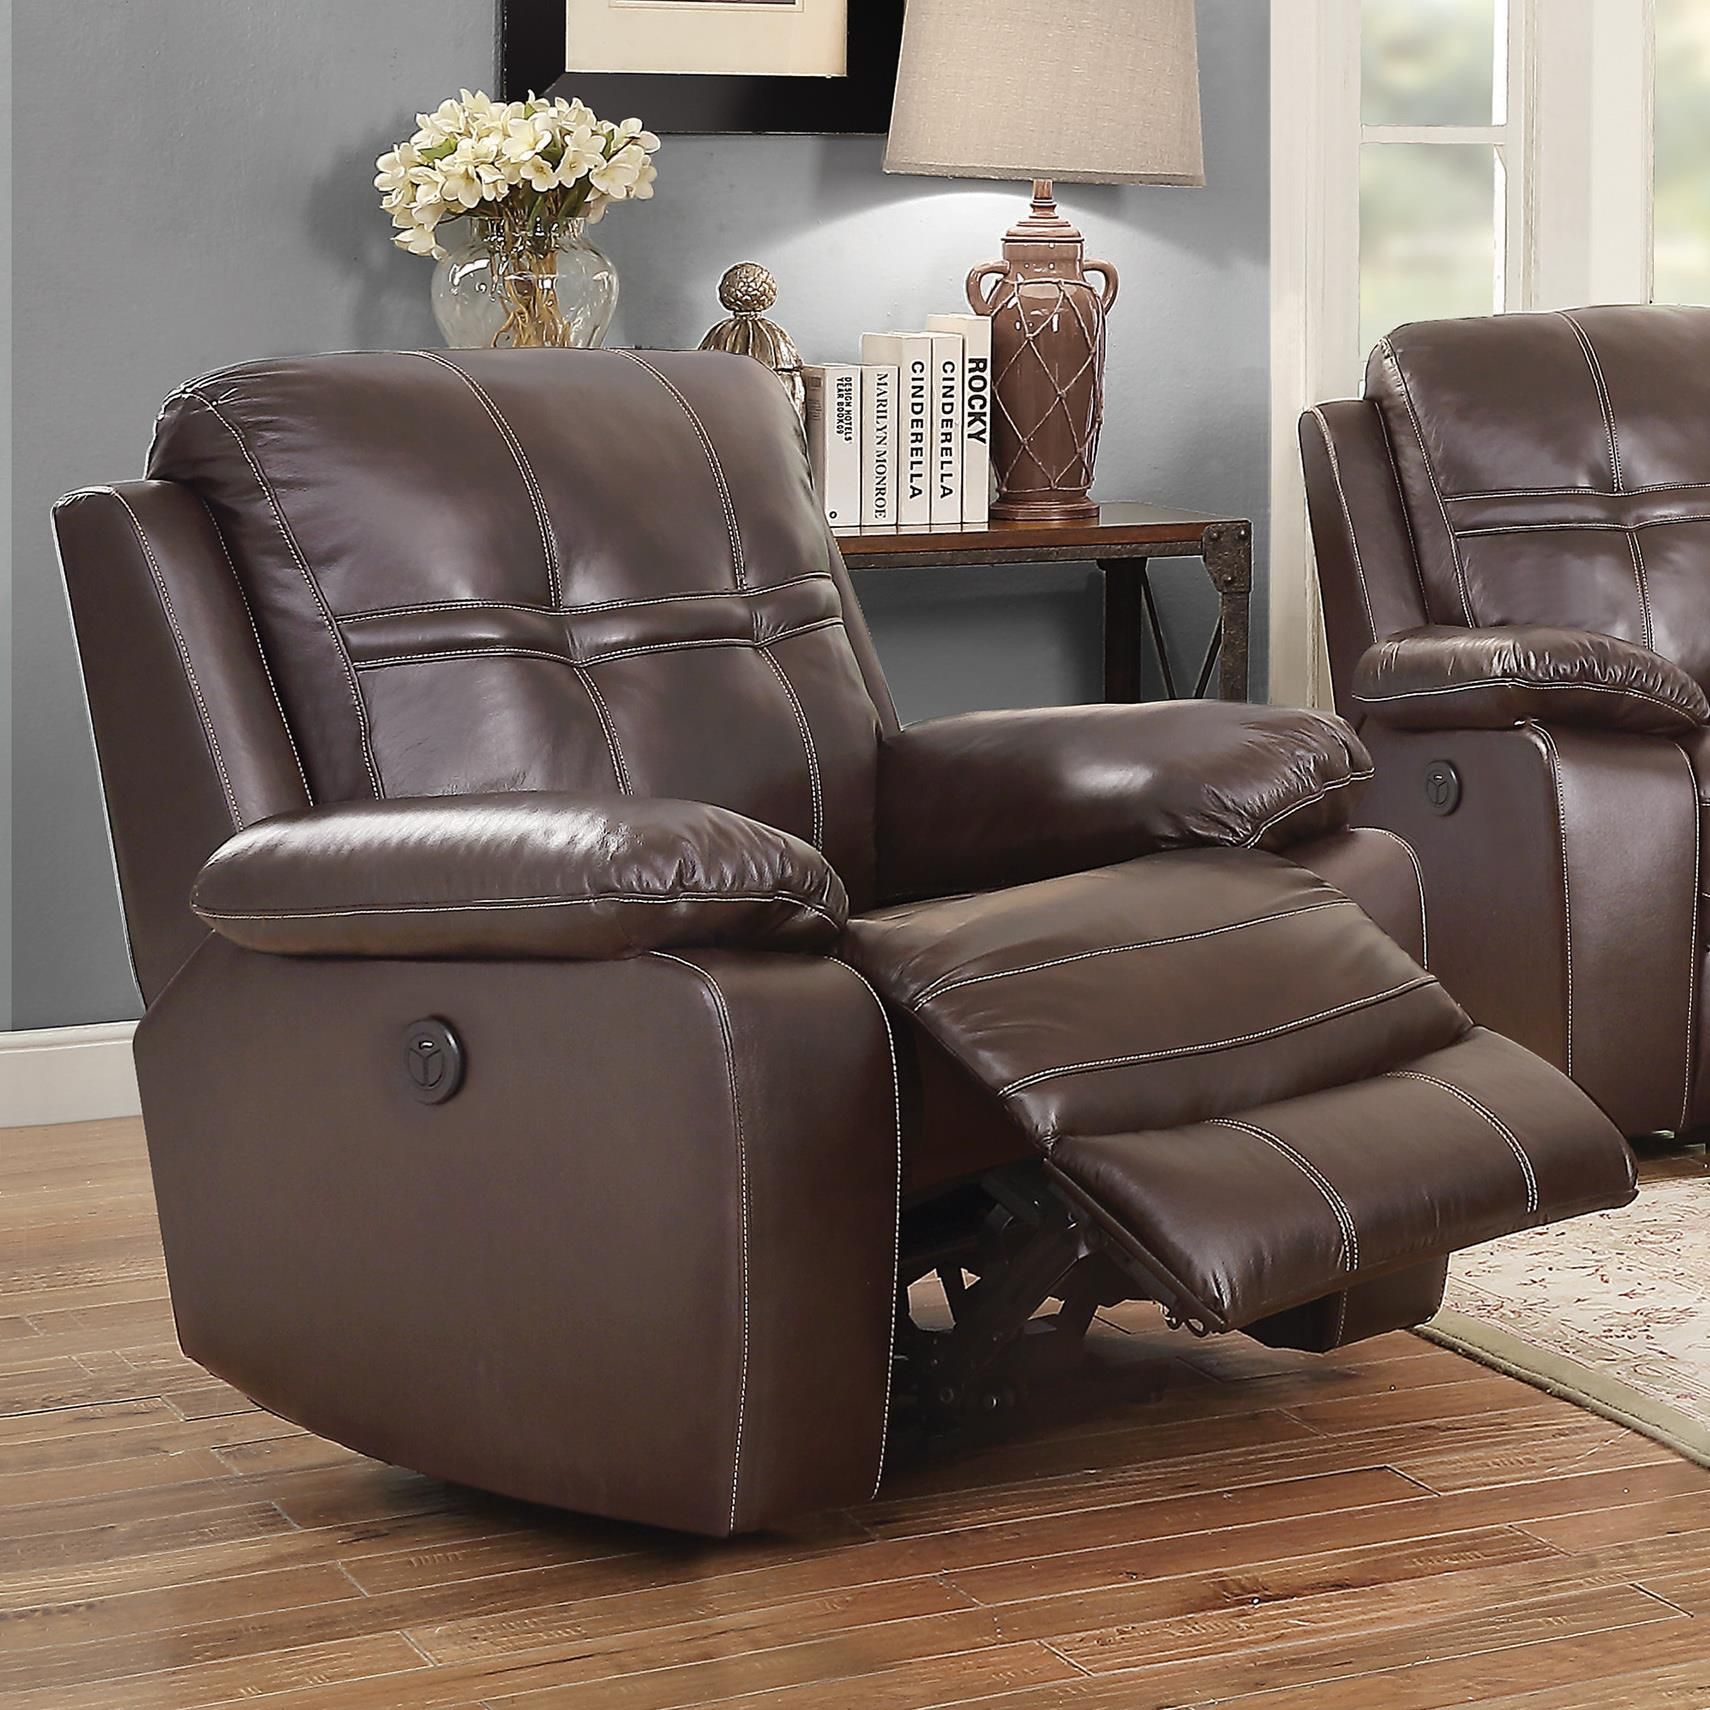 Holloway Leather Match Power Recliner With Usb Charger | Quality Intended For Espresso Faux Leather Ac And Usb Ottomans (View 3 of 20)